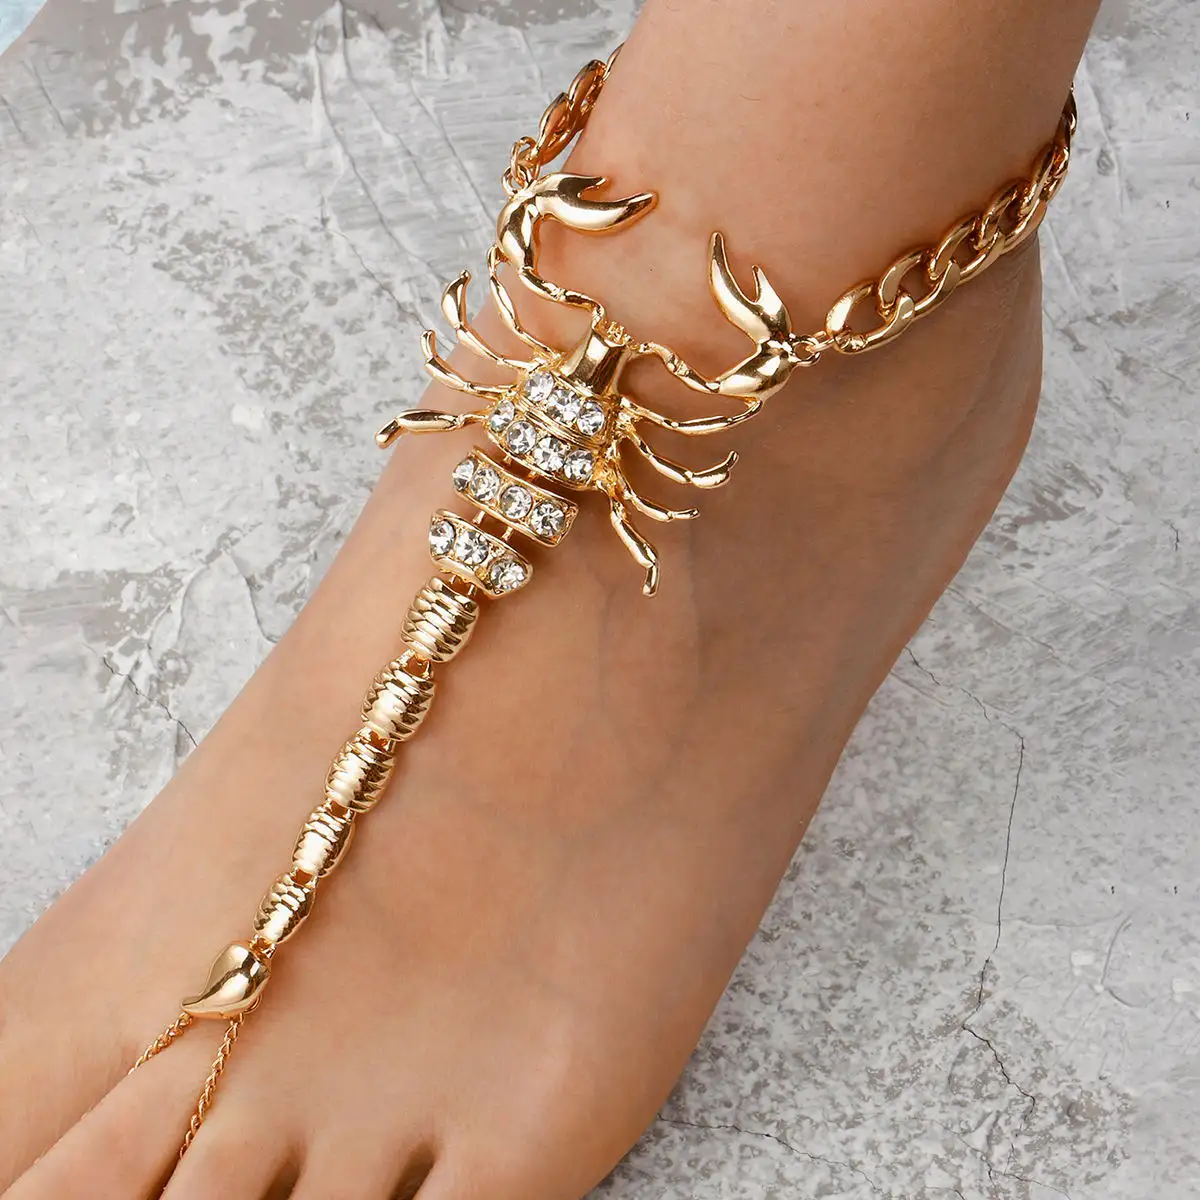 Scorpion Style Foot Chain Crystal Anklet Gold Beach Wedding Barefoot Sandals Foot Jewelry With Rhinestone Adjustable Anklet